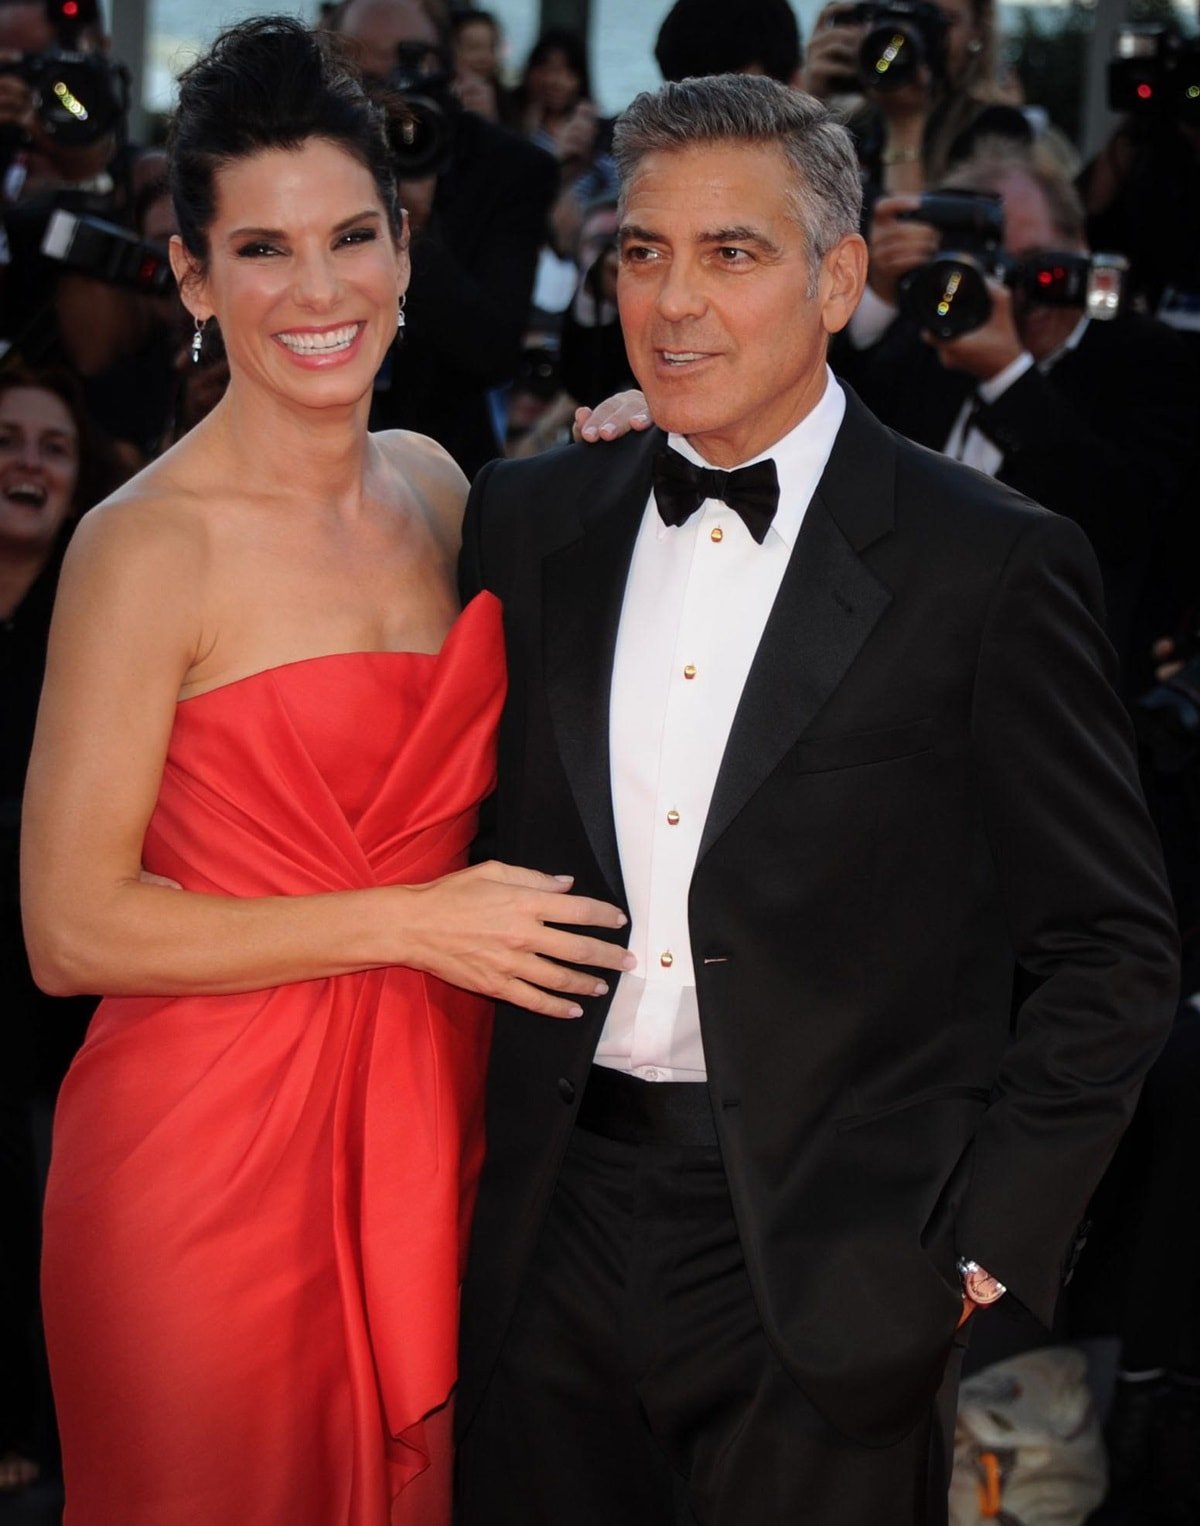 George Clooney has a taller stature, measuring at 5 feet 10 ¾ inches (179.7 cm), in contrast to Sandra Bullock's height of 5 feet 7 inches (170.2 cm)